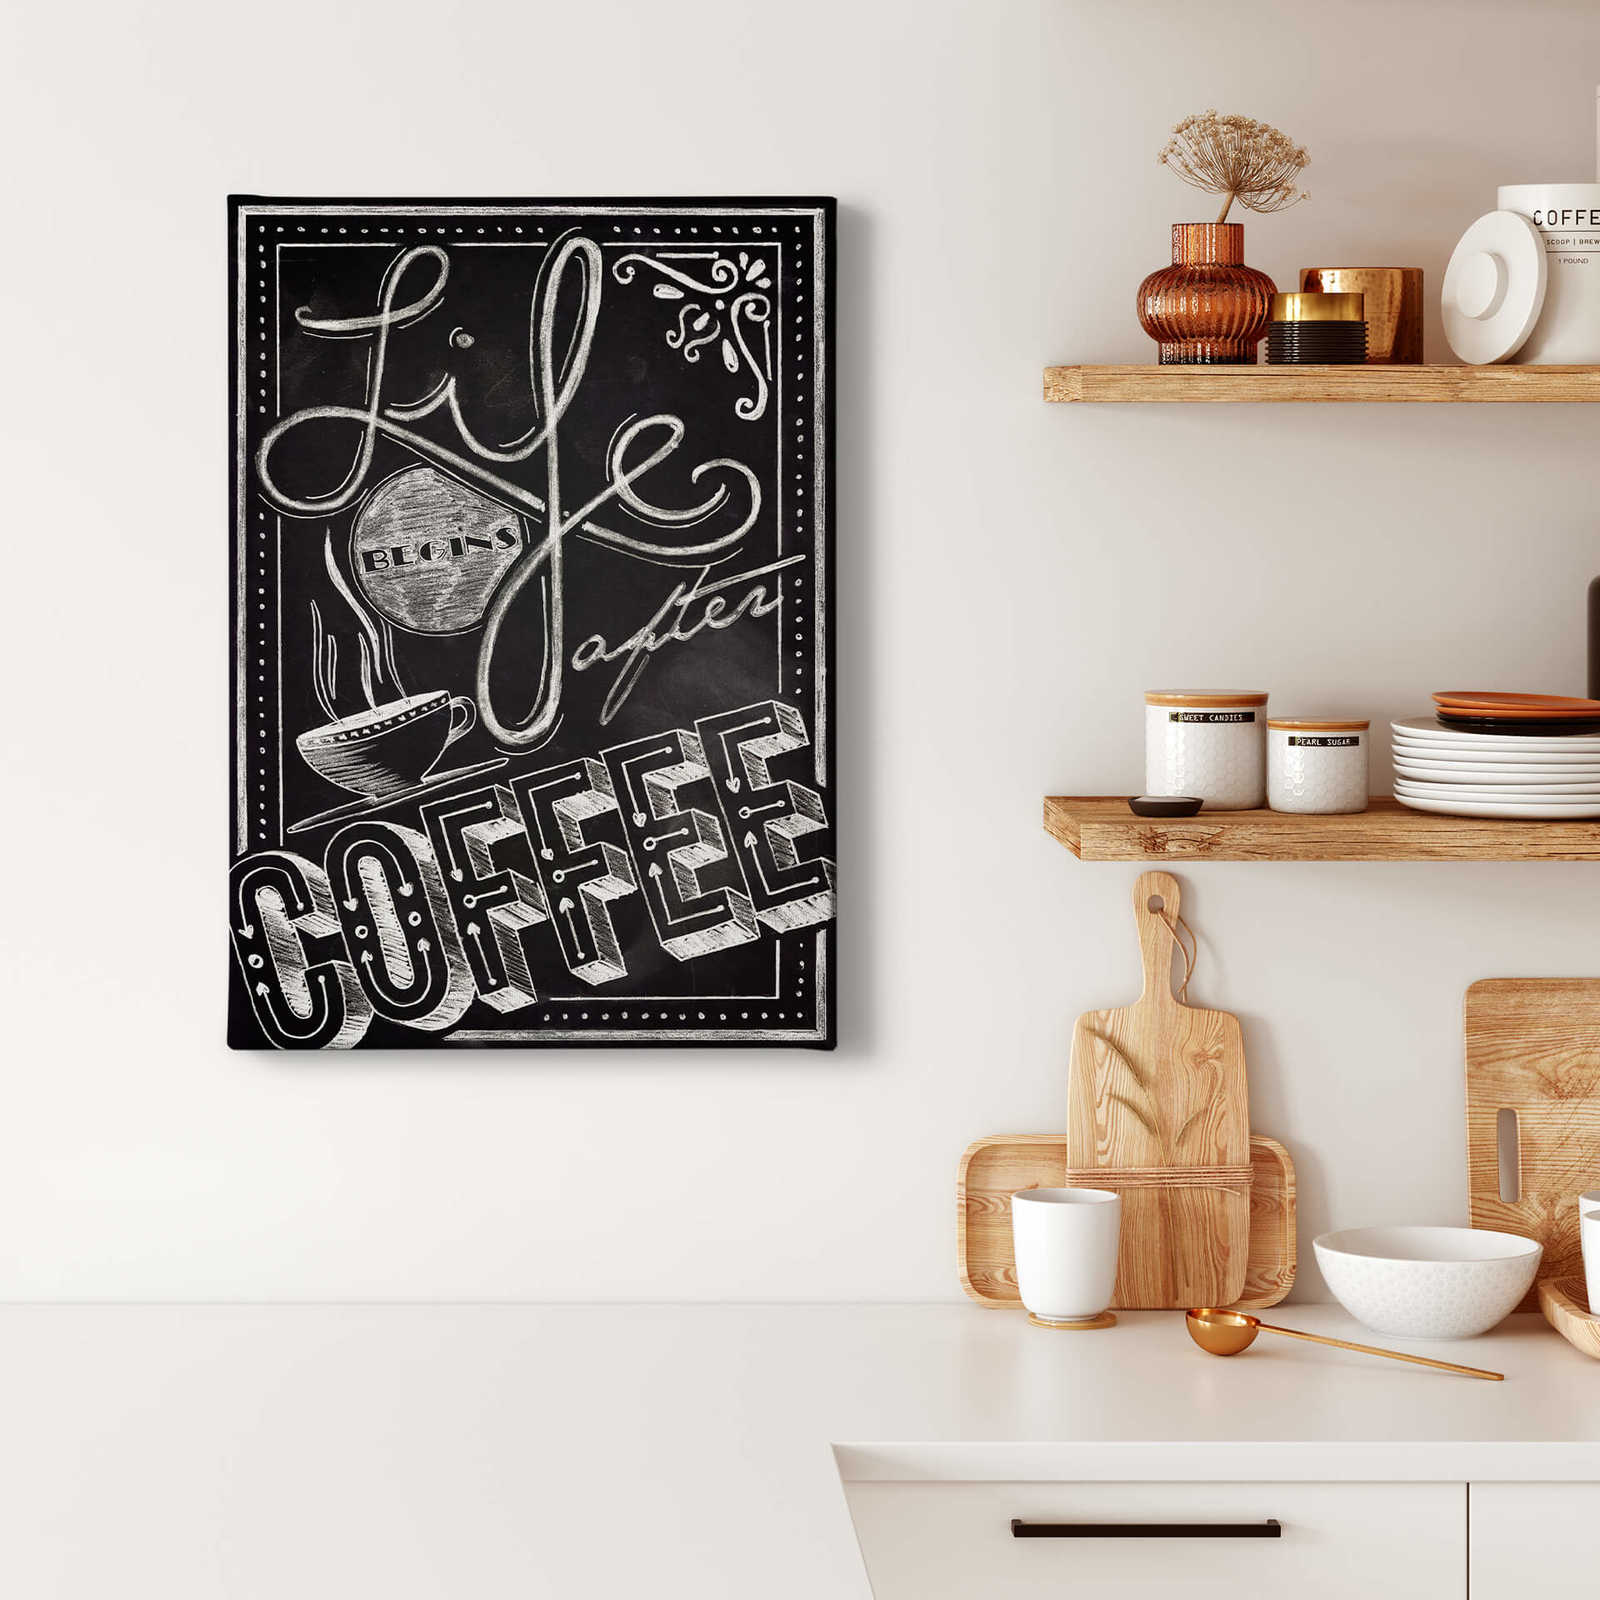             Canvas print coffeeshop sign, black and white
        